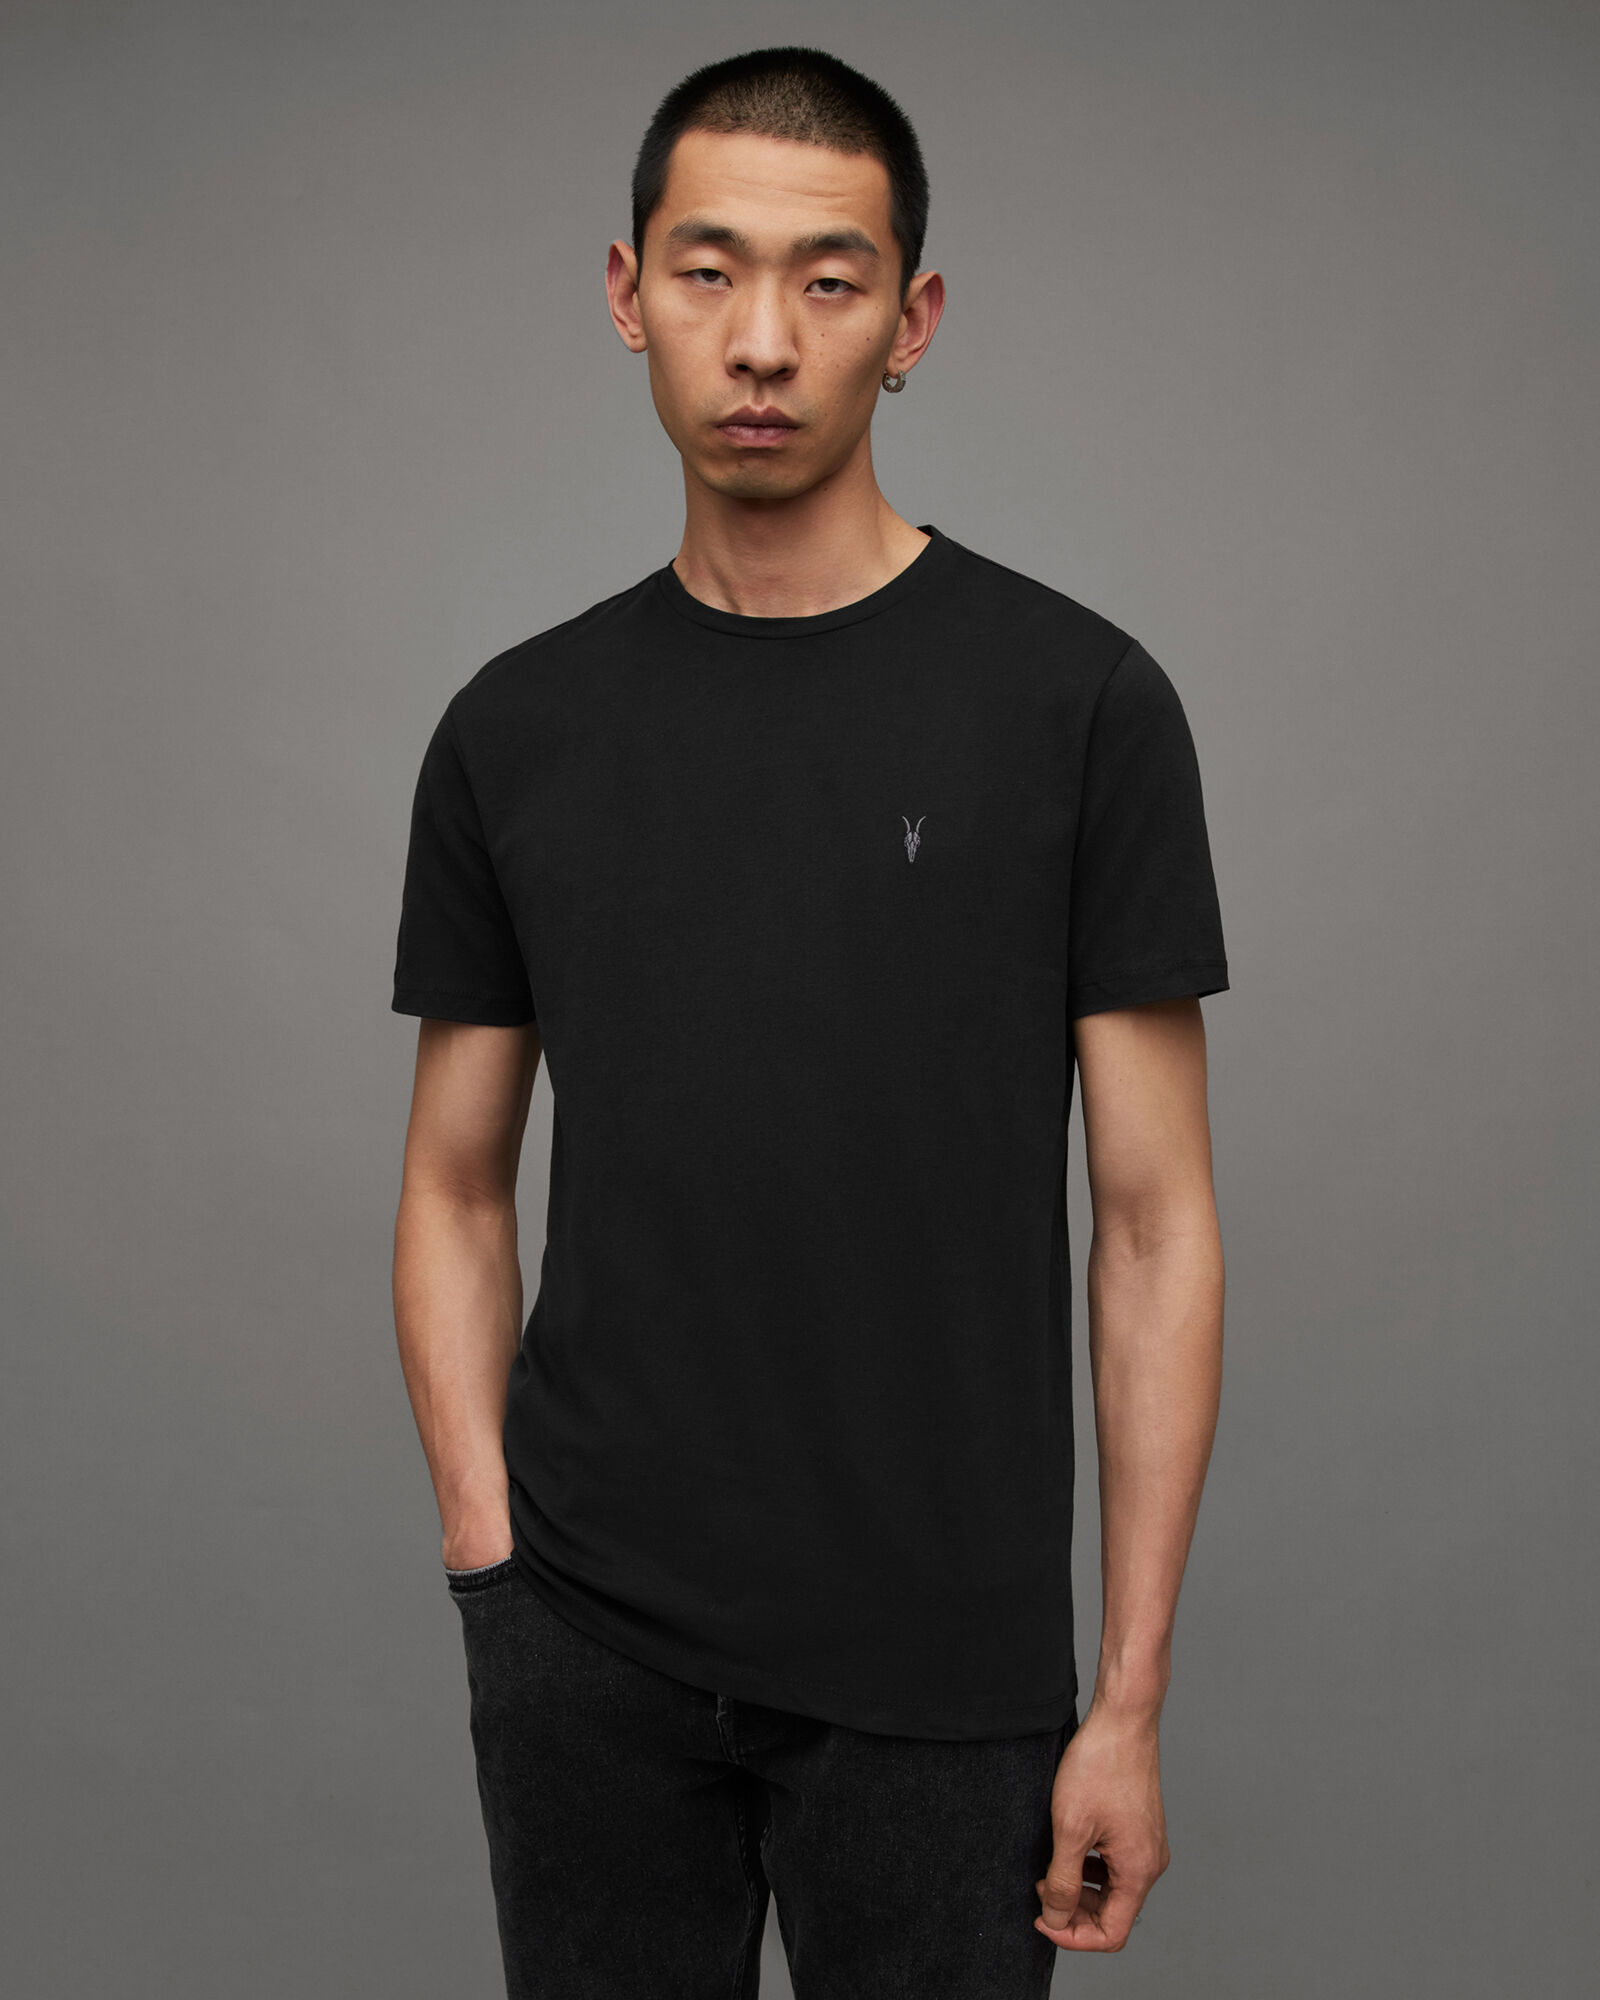 FINALSALE対象商品30％OFF！ ENNOY 3PACK ENNOY ENNOY 3PACK T-SHIRTS WHT/BLK/GRY メンズ